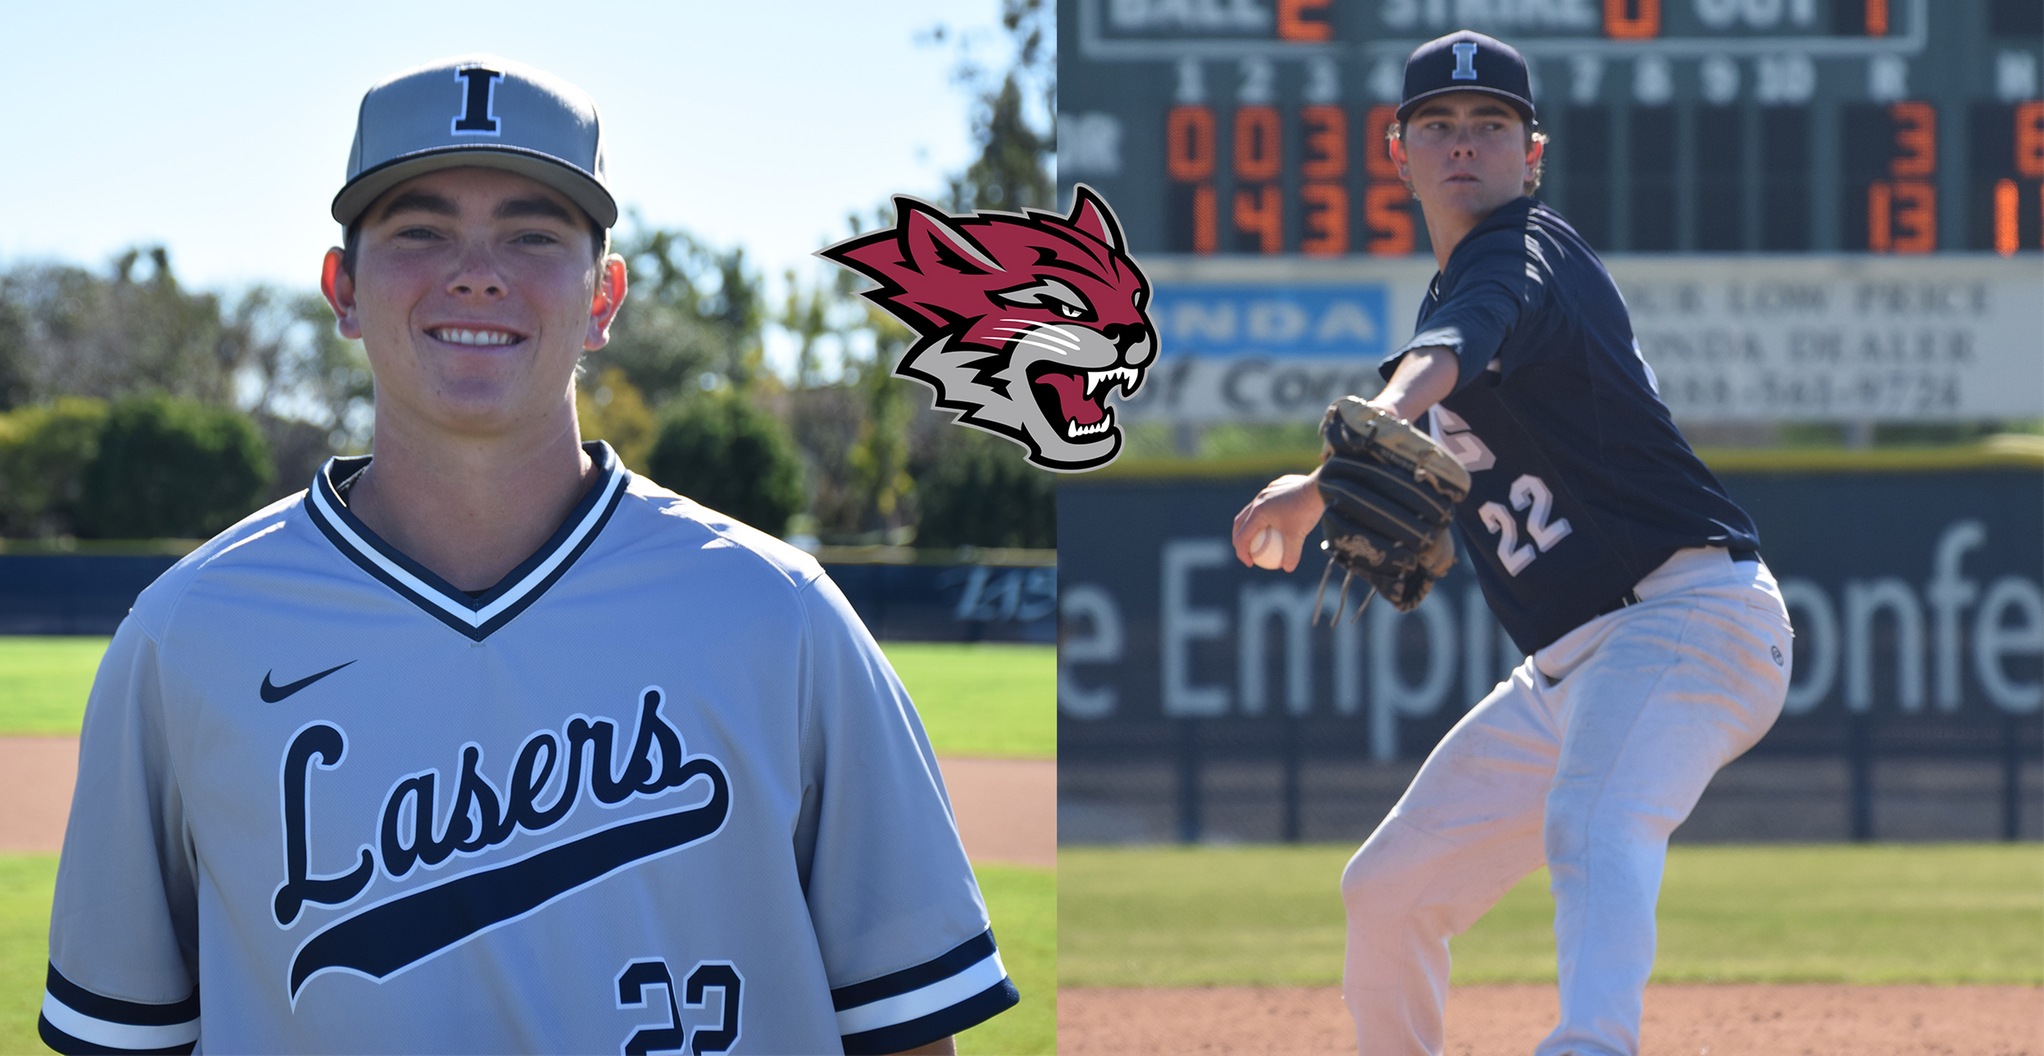 Laser pitcher Chad Burchit headed to Chico State